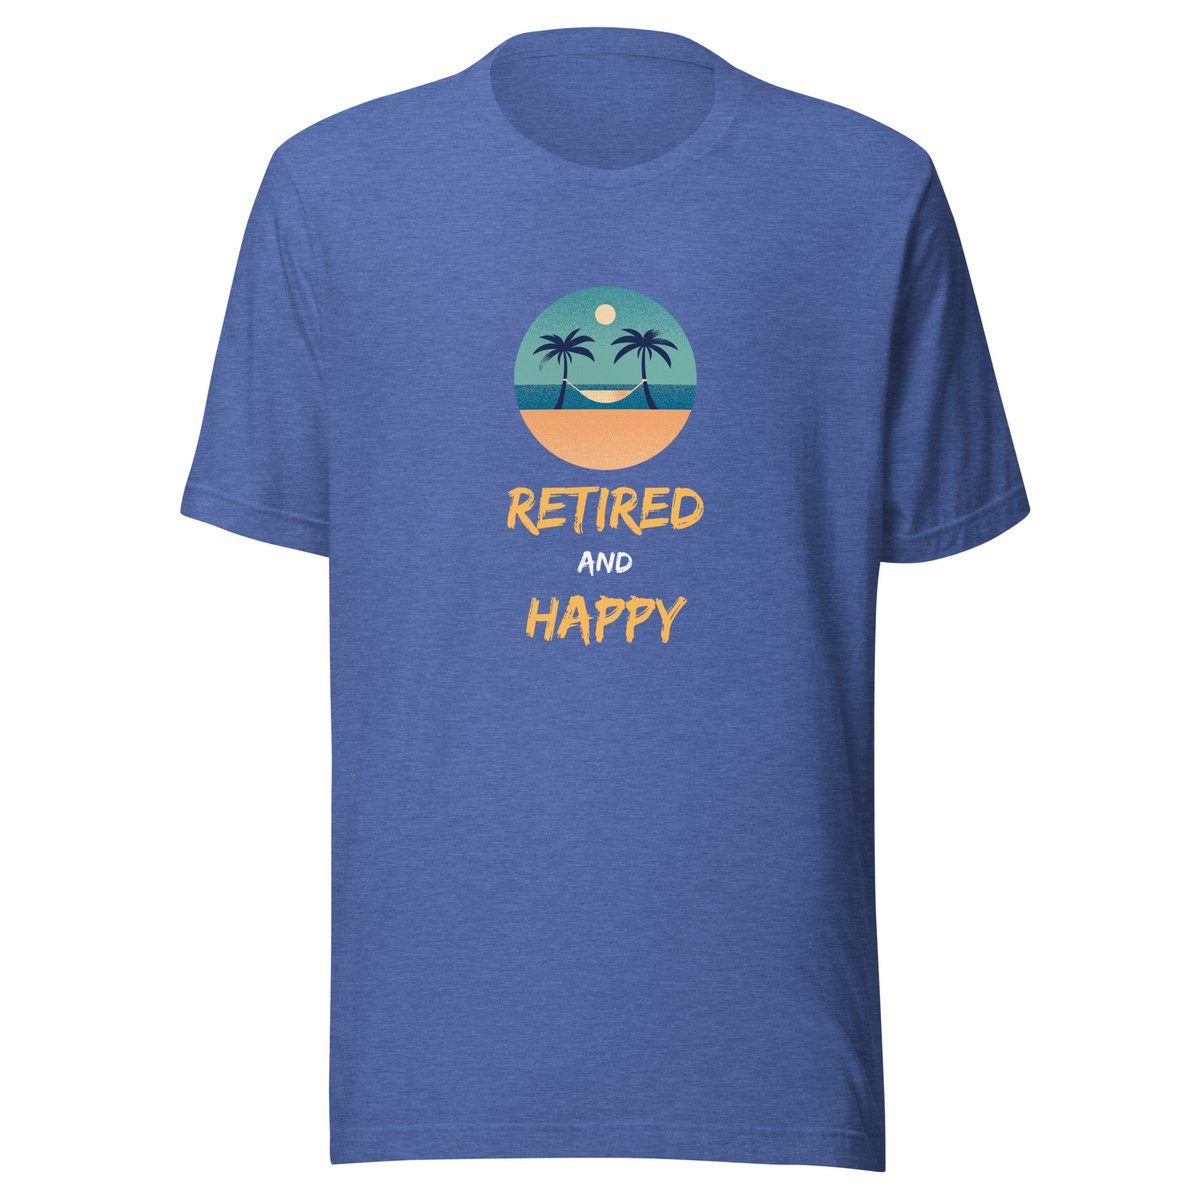 Retirement never looked so good! 😎 Embrace the joy of post-work freedom with our 'Retired and Happy' unisex t-shirt. 🌄✨ #RetirementBliss #HikeRunner #printedtees

Get yours today 🛍️⬇️⬇️⬇️
buff.ly/3ojfrJ1